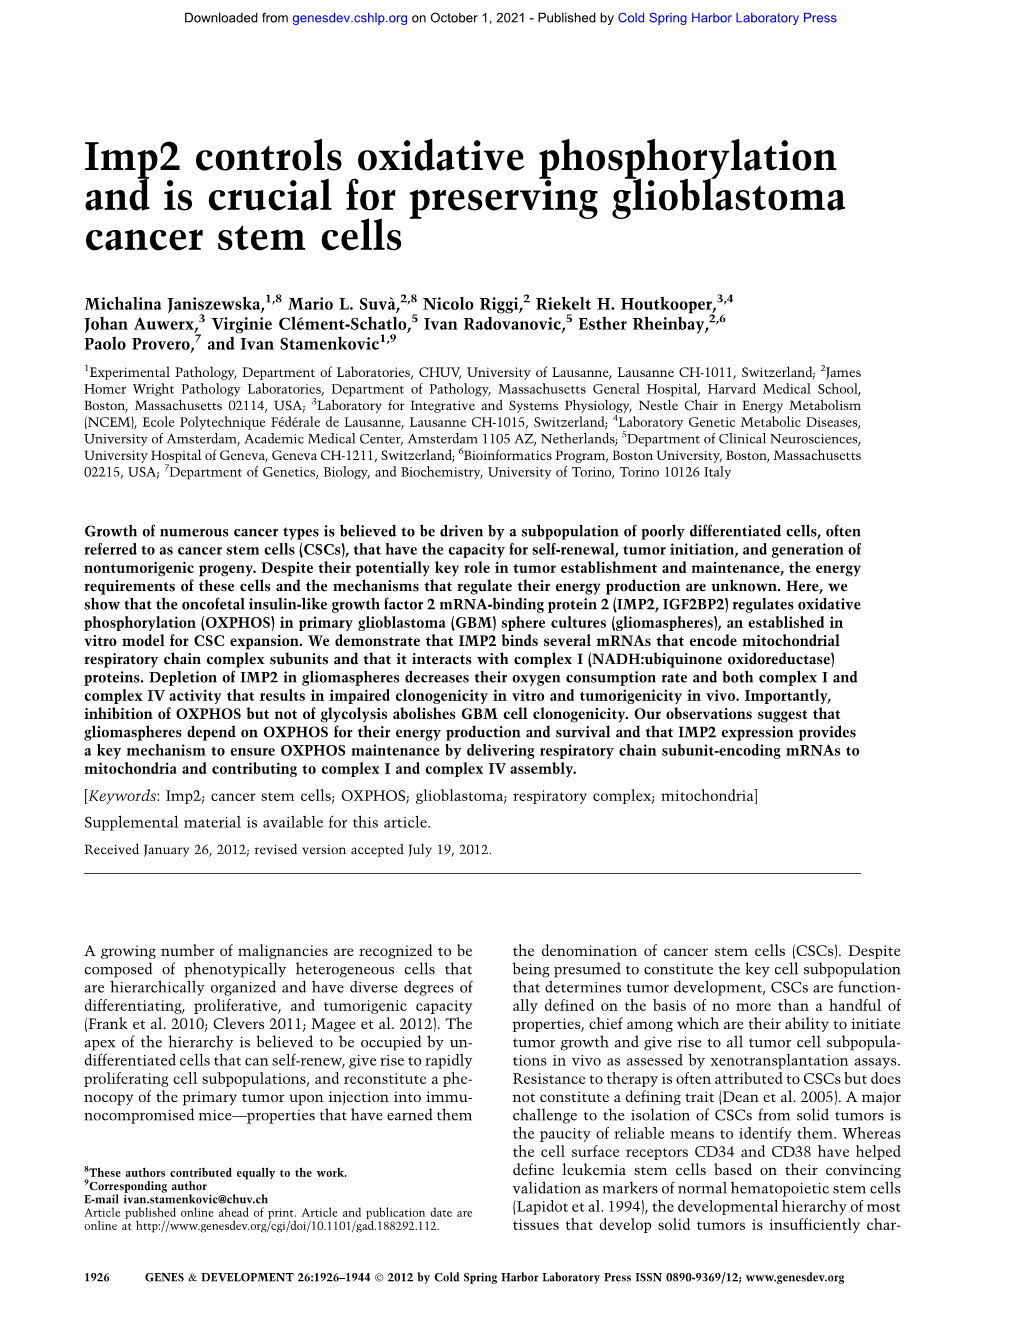 Imp2 Controls Oxidative Phosphorylation and Is Crucial for Preserving Glioblastoma Cancer Stem Cells